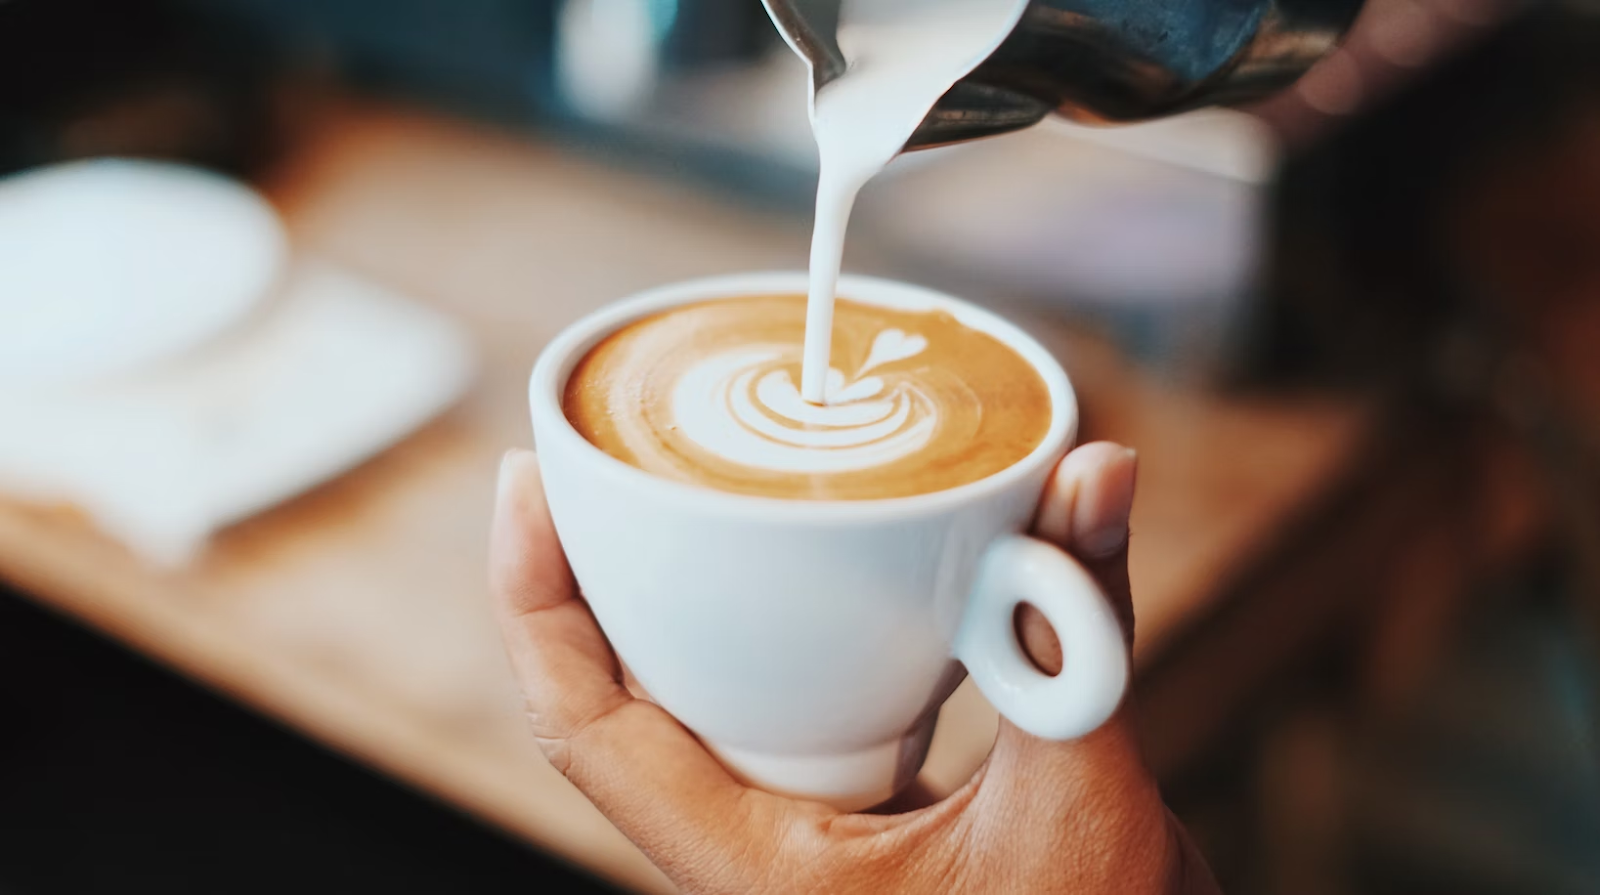 How To Become A Coffee Connoisseur In 6 Simple Steps